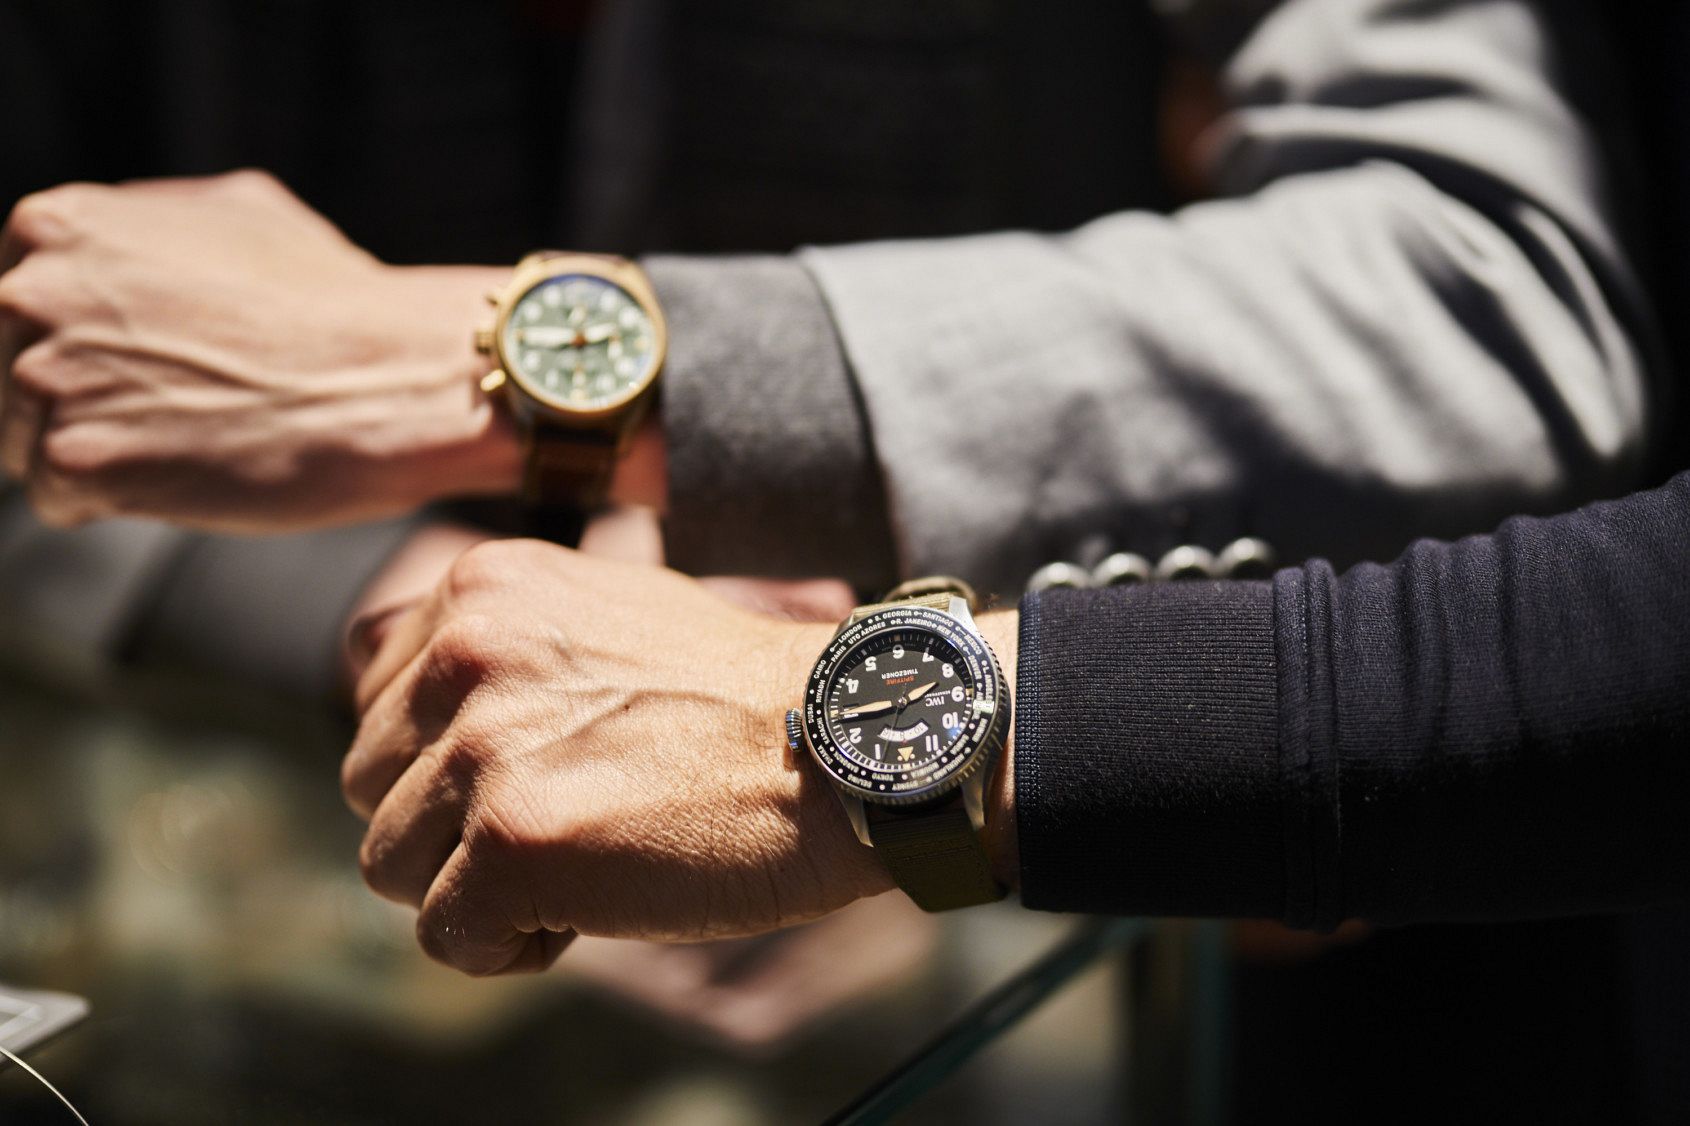 EVENT: Wheels up with the new Pilot's collection at IWC's Melbourne ...